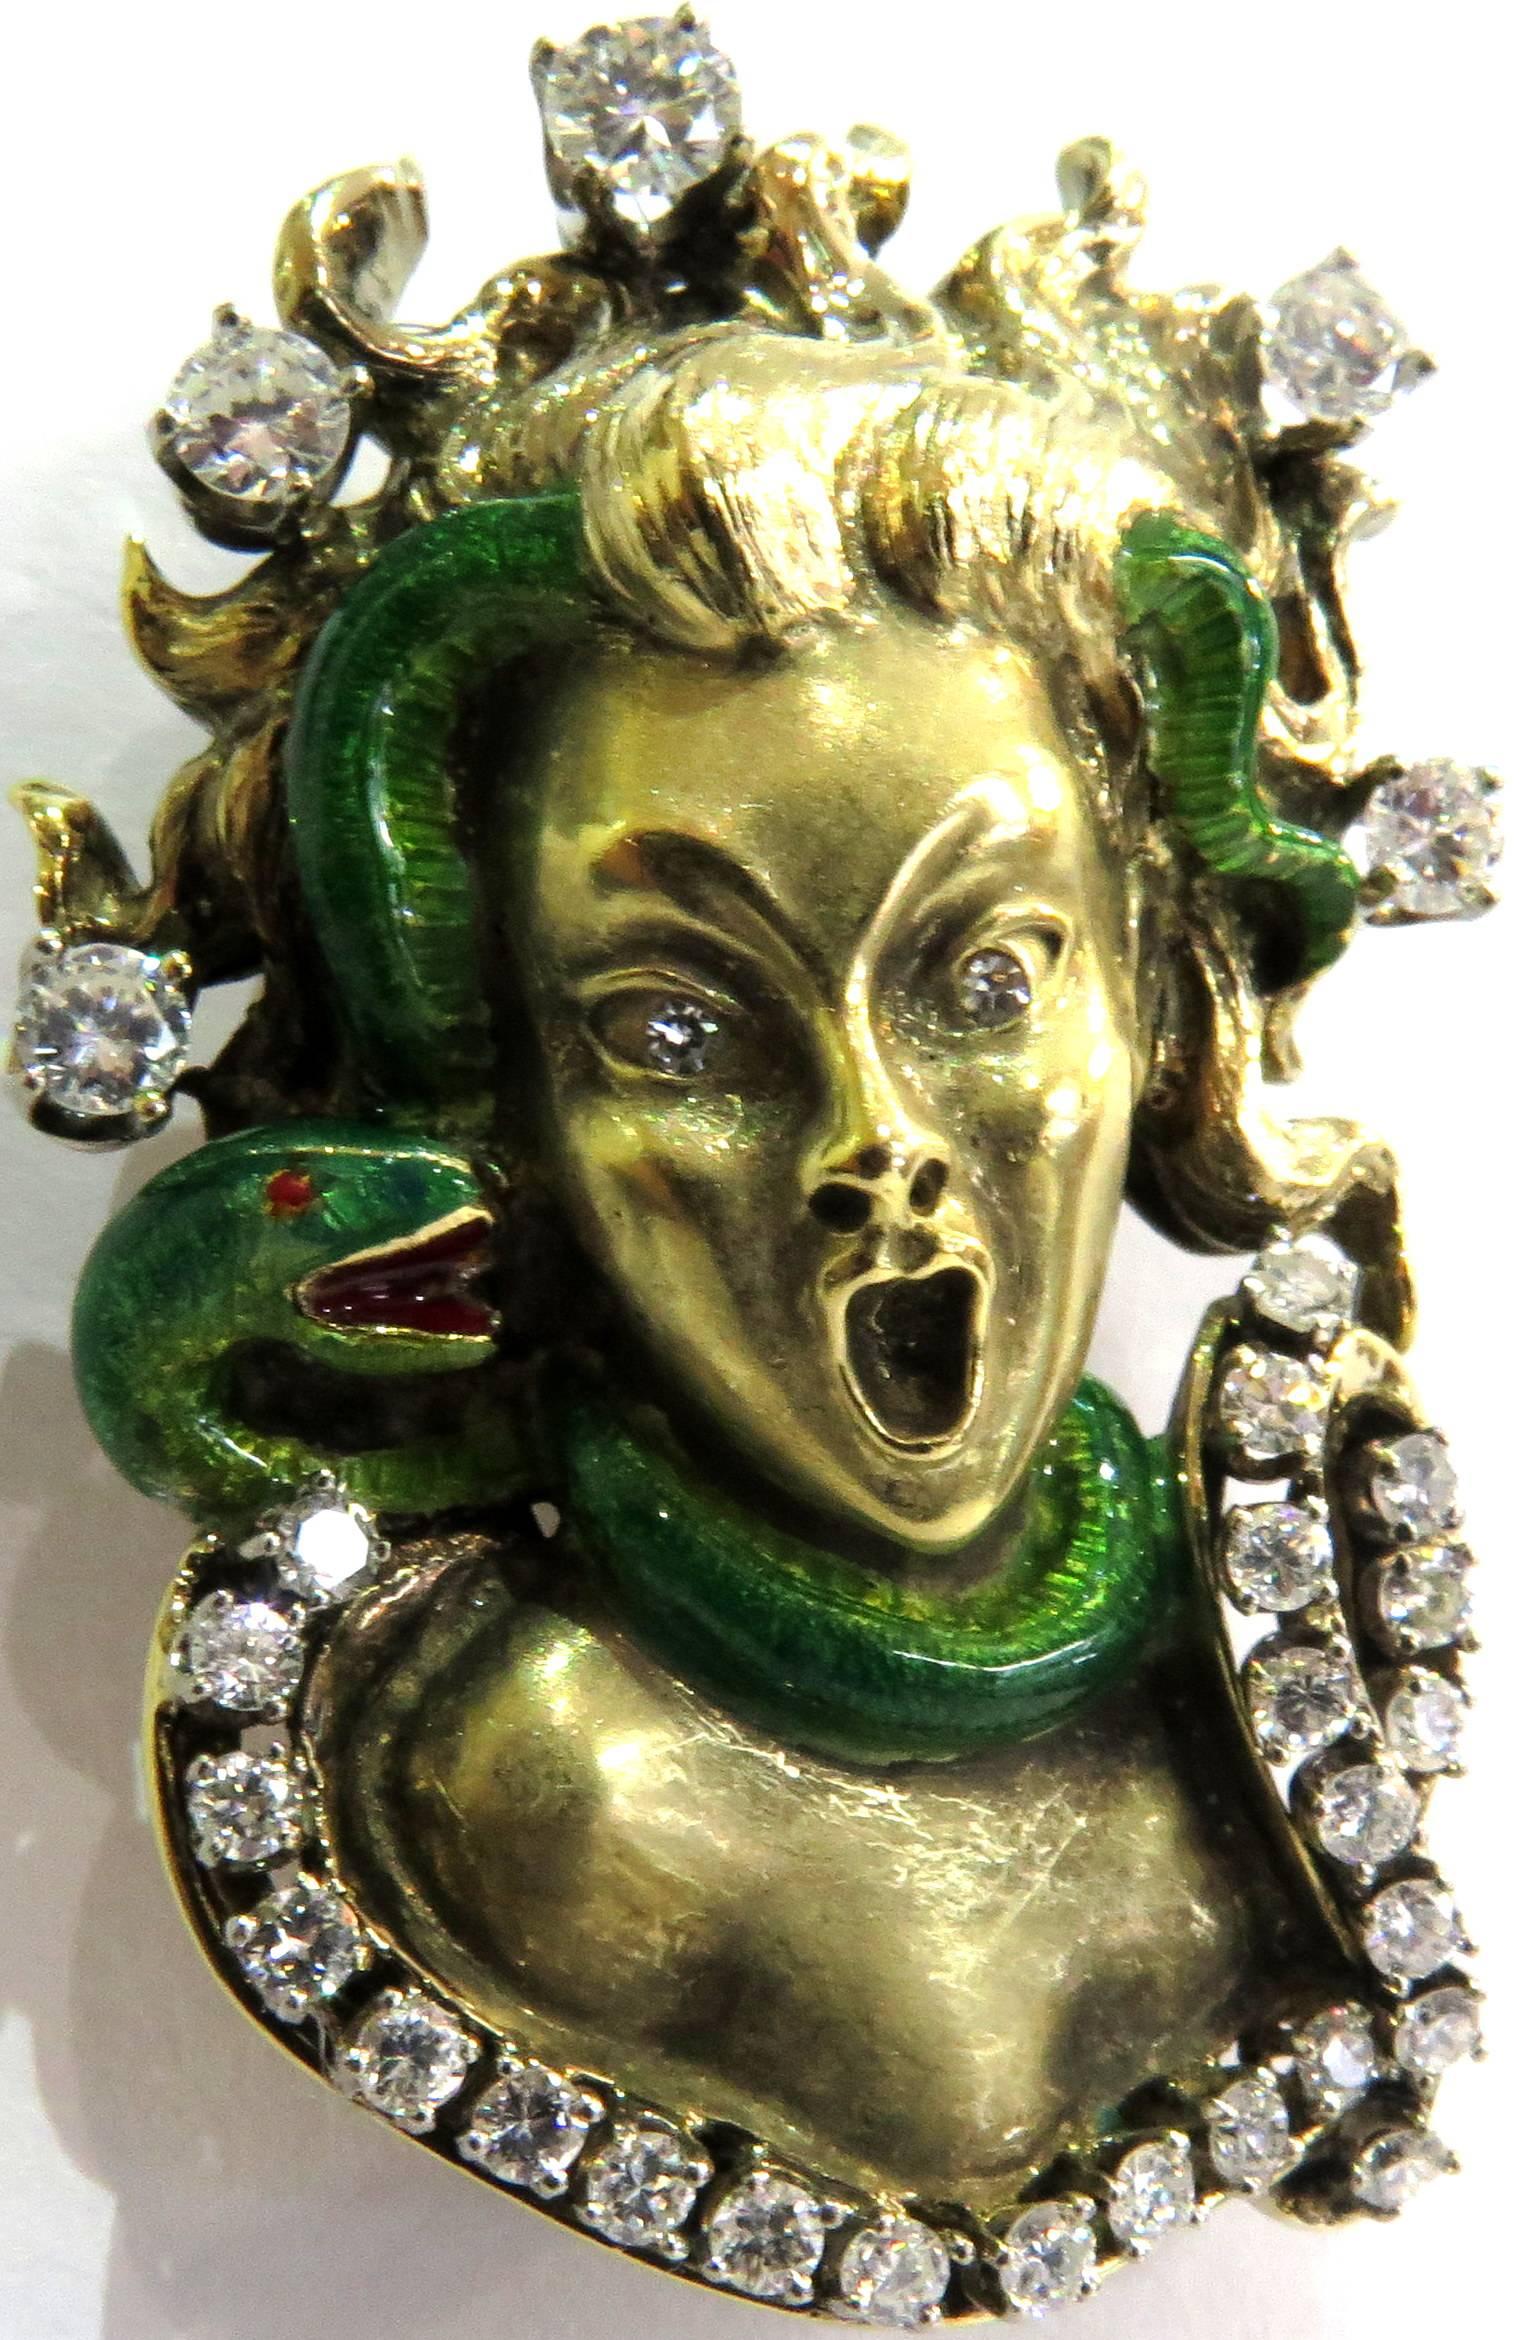 This incredible Mario Boschi Medusa pin has such extreme character. The detail is so fine it looks more like a sculpture. This pin is all 18k yellow gold with a slithering green enamel snake draping caressing around her neck, hair and face. There